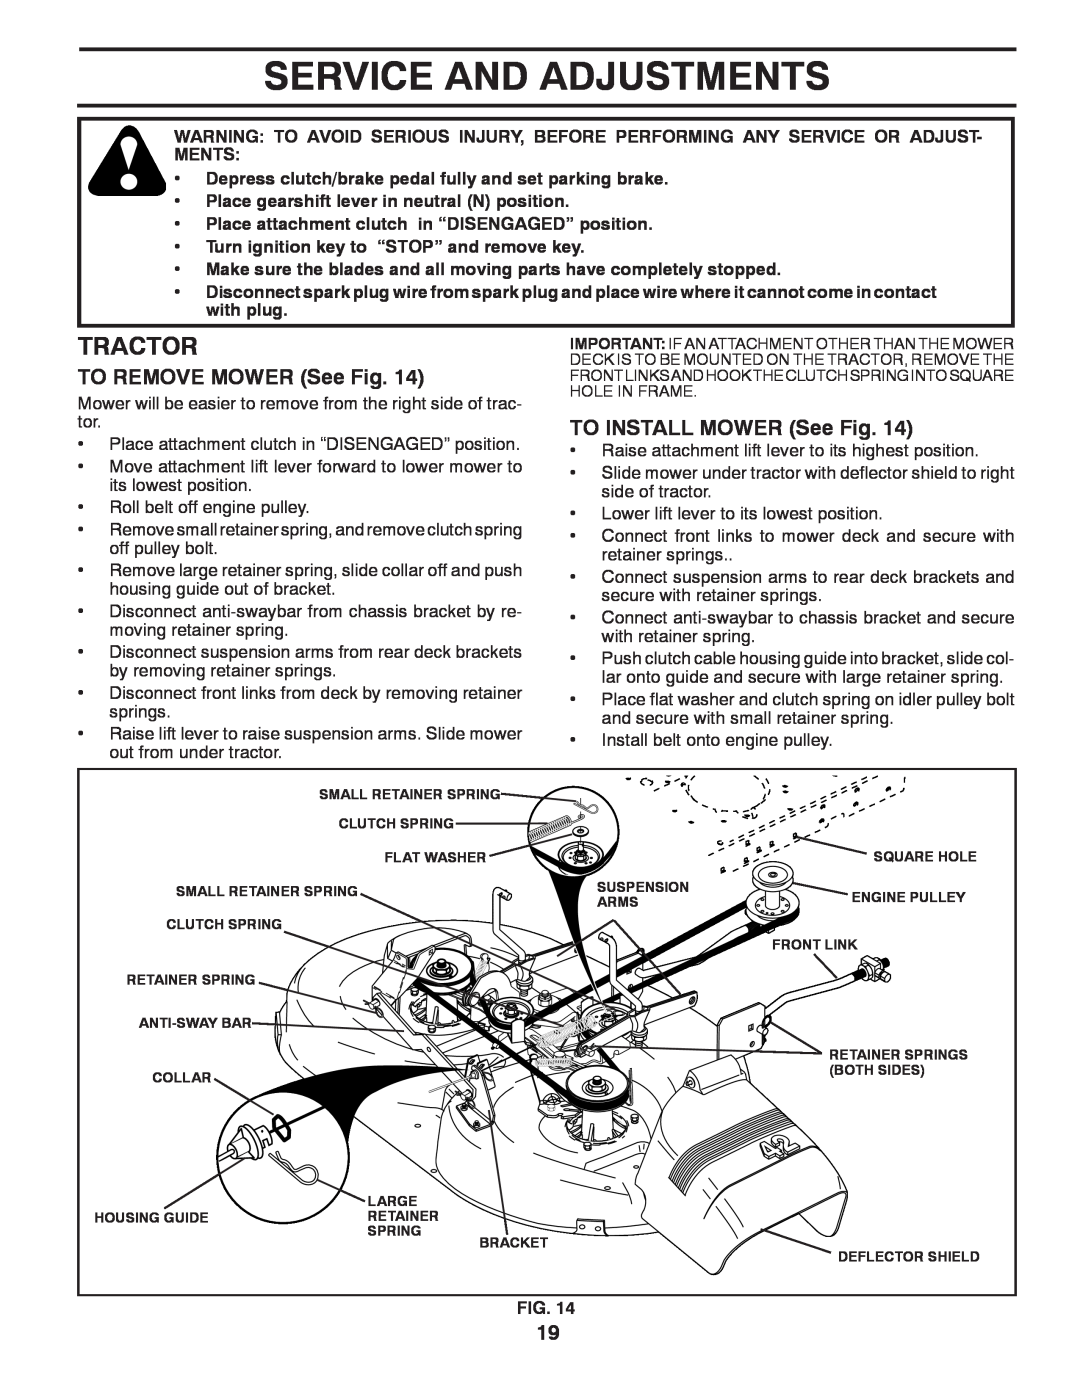 Poulan 433507, 96012010900 manual Service And Adjustments, TO REMOVE MOWER See Fig, TO INSTALL MOWER See Fig, Tractor 